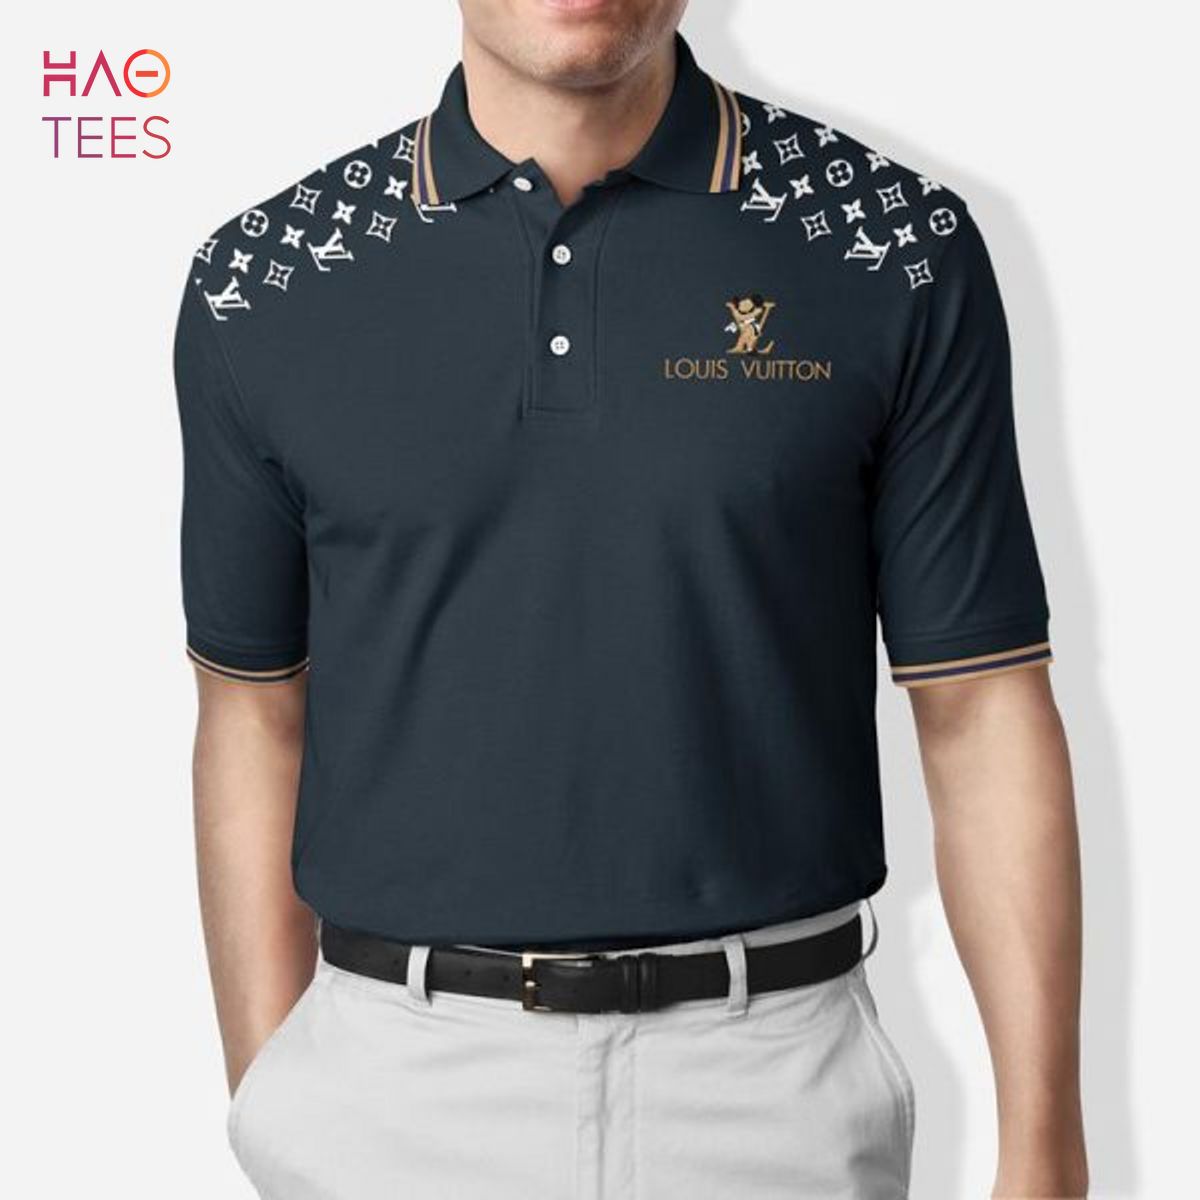 Louis Vuitton Luxury Brand White Polo Shirt Limited Edition